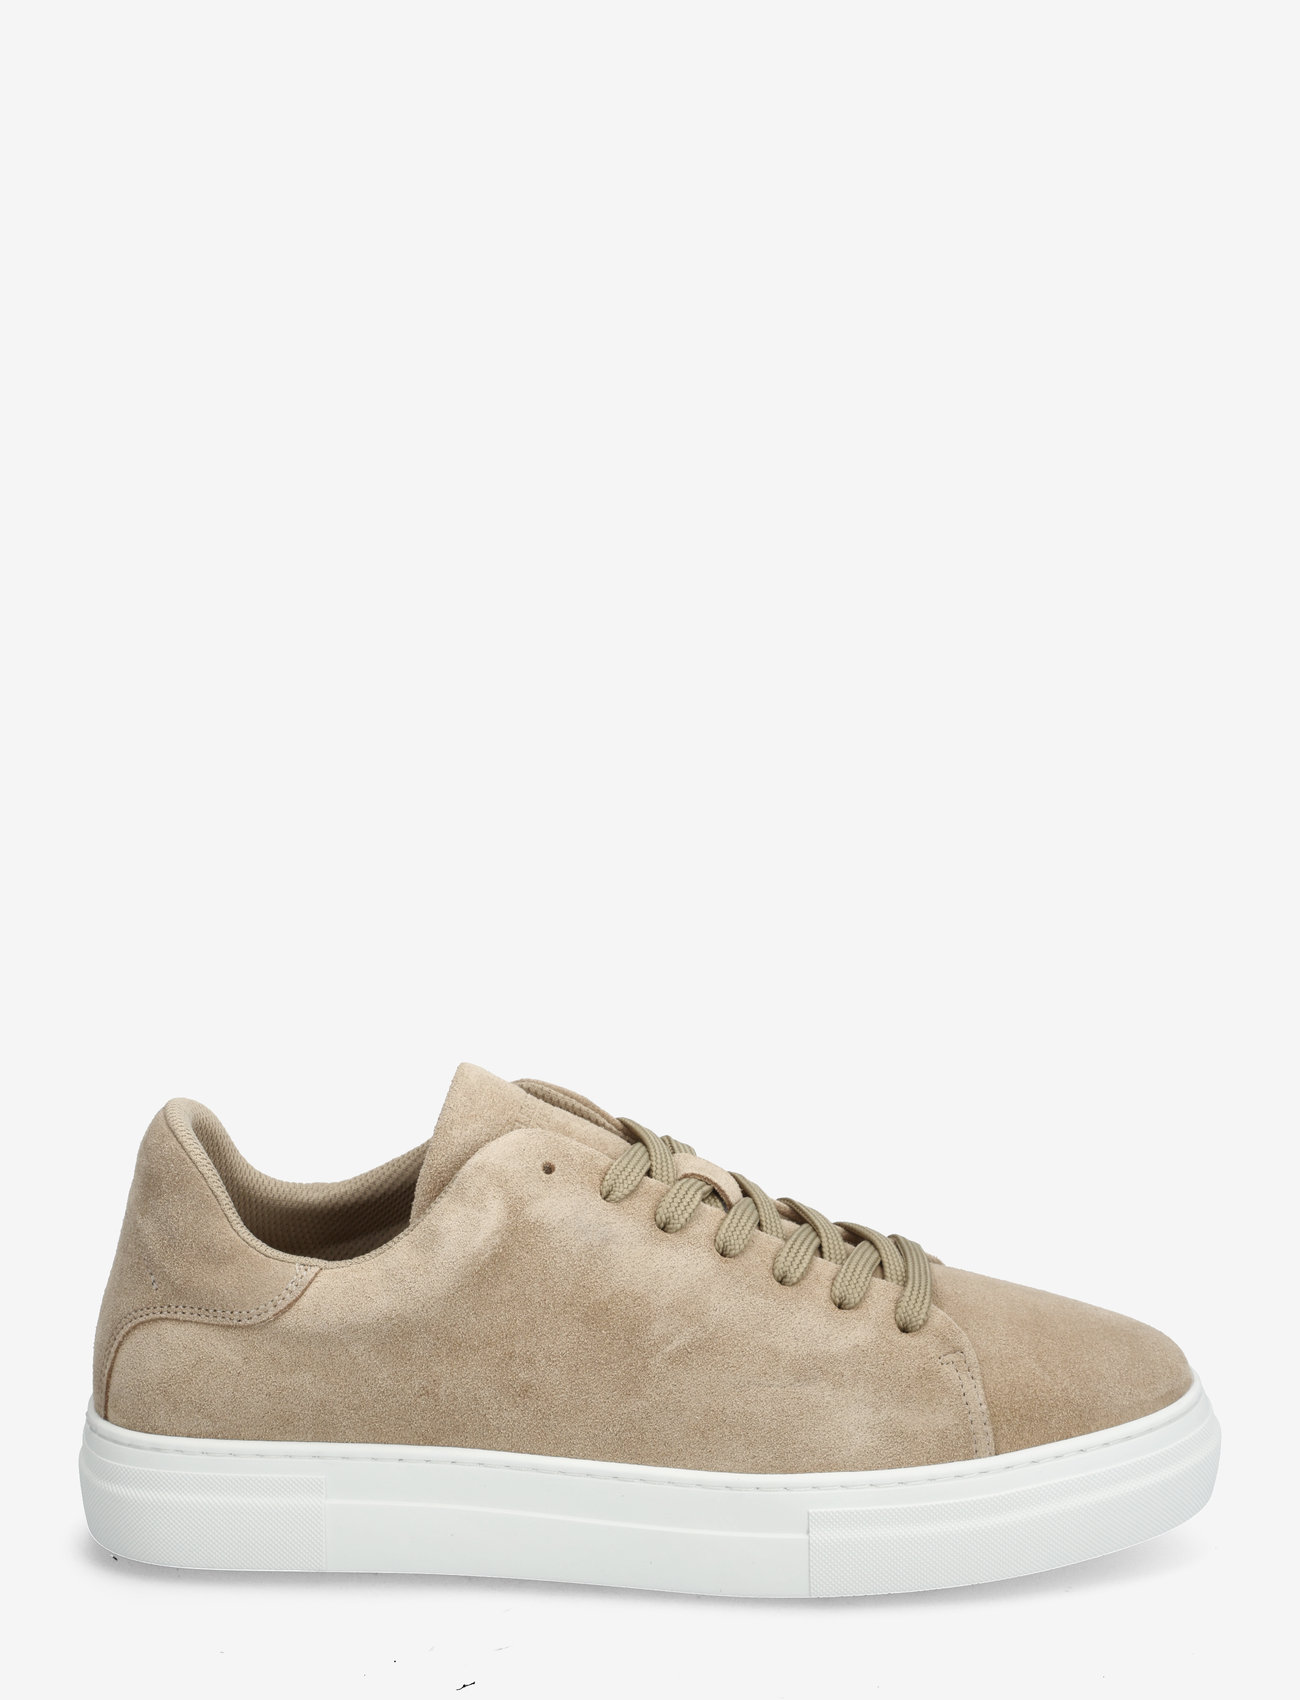 Selected Homme - SLHDAVID CHUNKY CLEAN SUEDE TRAINER B - niedriger schnitt - sand - 1